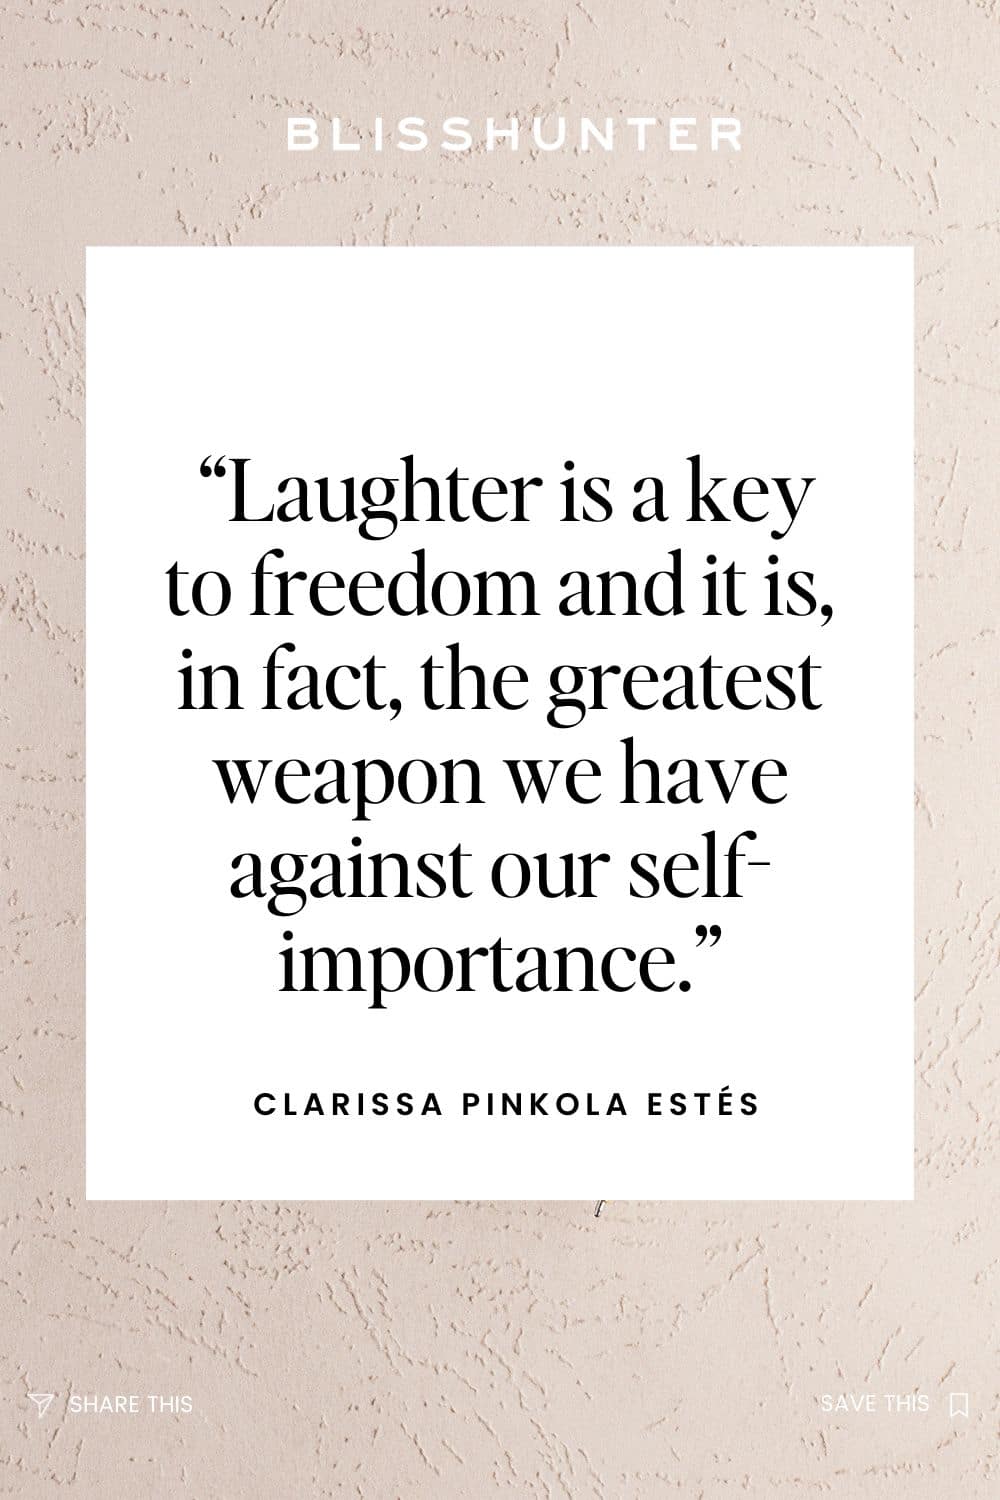 Inspirational quote by Clarissa Pinkola Estés: from one of the best books about Feminine Energy pasted on a textured background: 'Laughter is a key to freedom and it is, in fact, the greatest weapon we have against our self-importance.